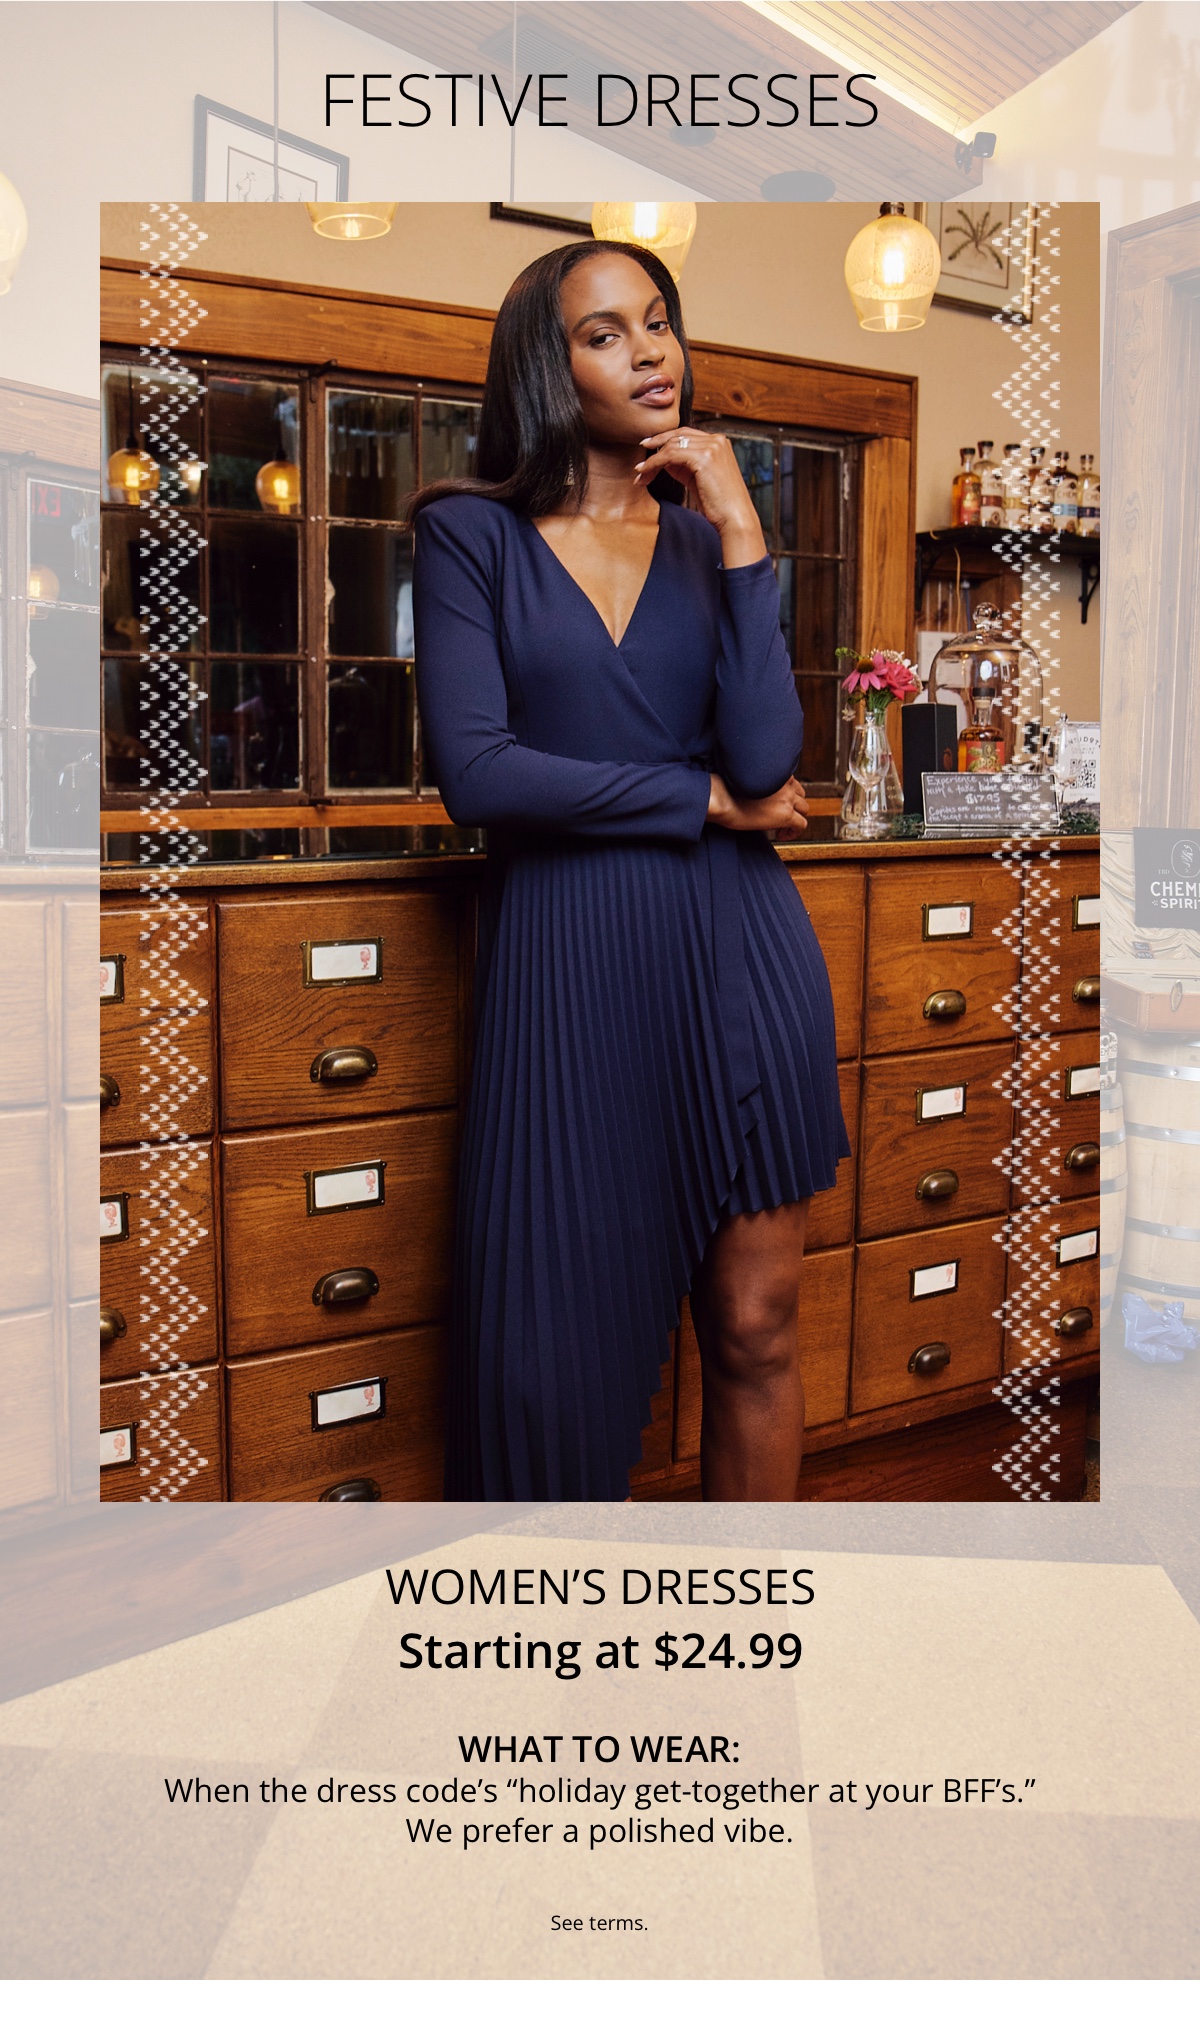 Festive Dresses|Womens Dresses|Starting at $24.99|What to Wear:|When the dress codes holiday get-together at your BFFs. We prefer a polished vibe.|See terms.